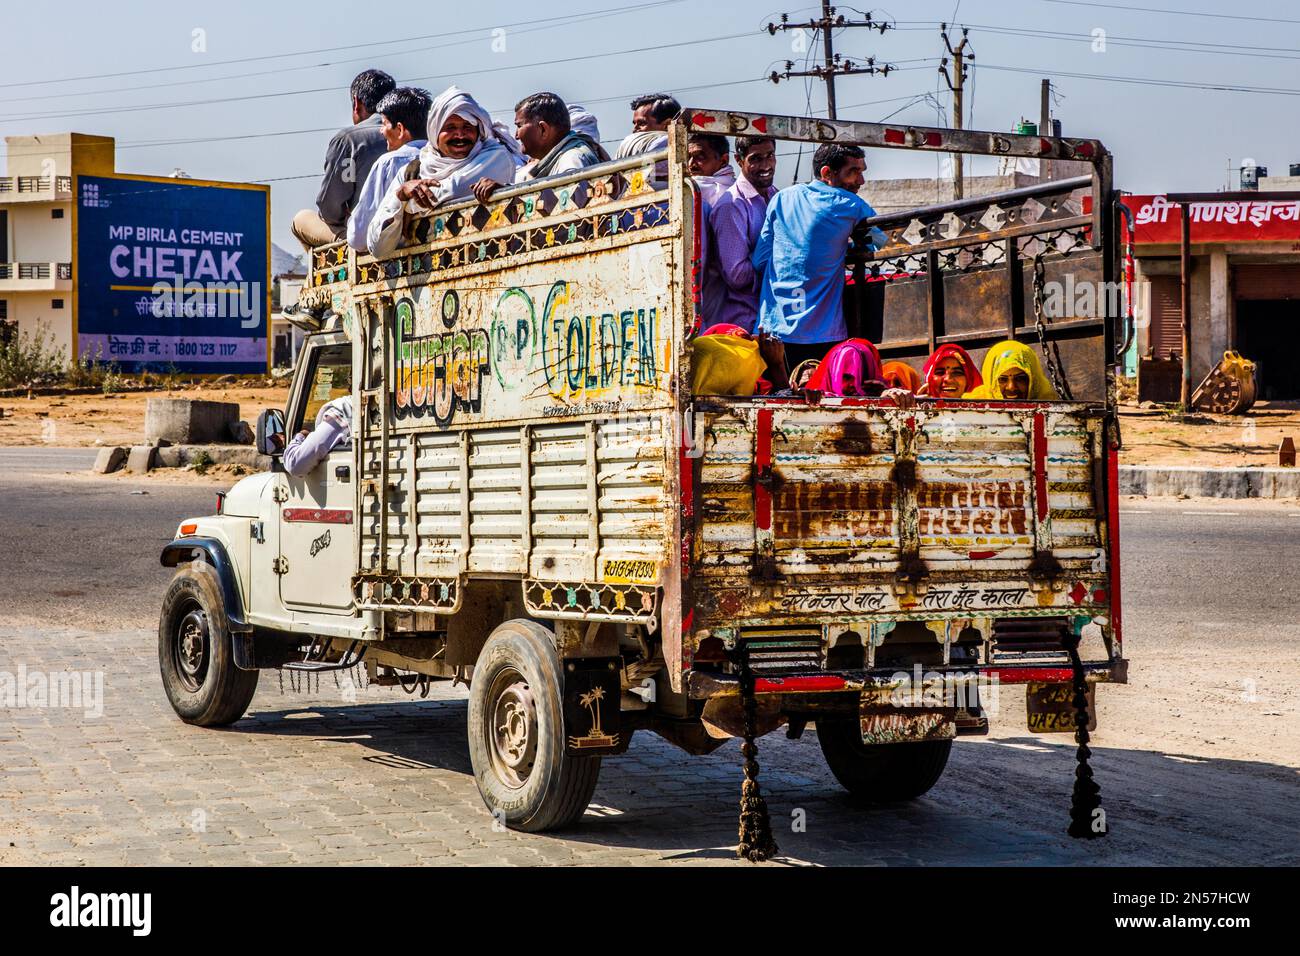 Camion piccolo ben occupato in India, Rajasthan, India Foto Stock